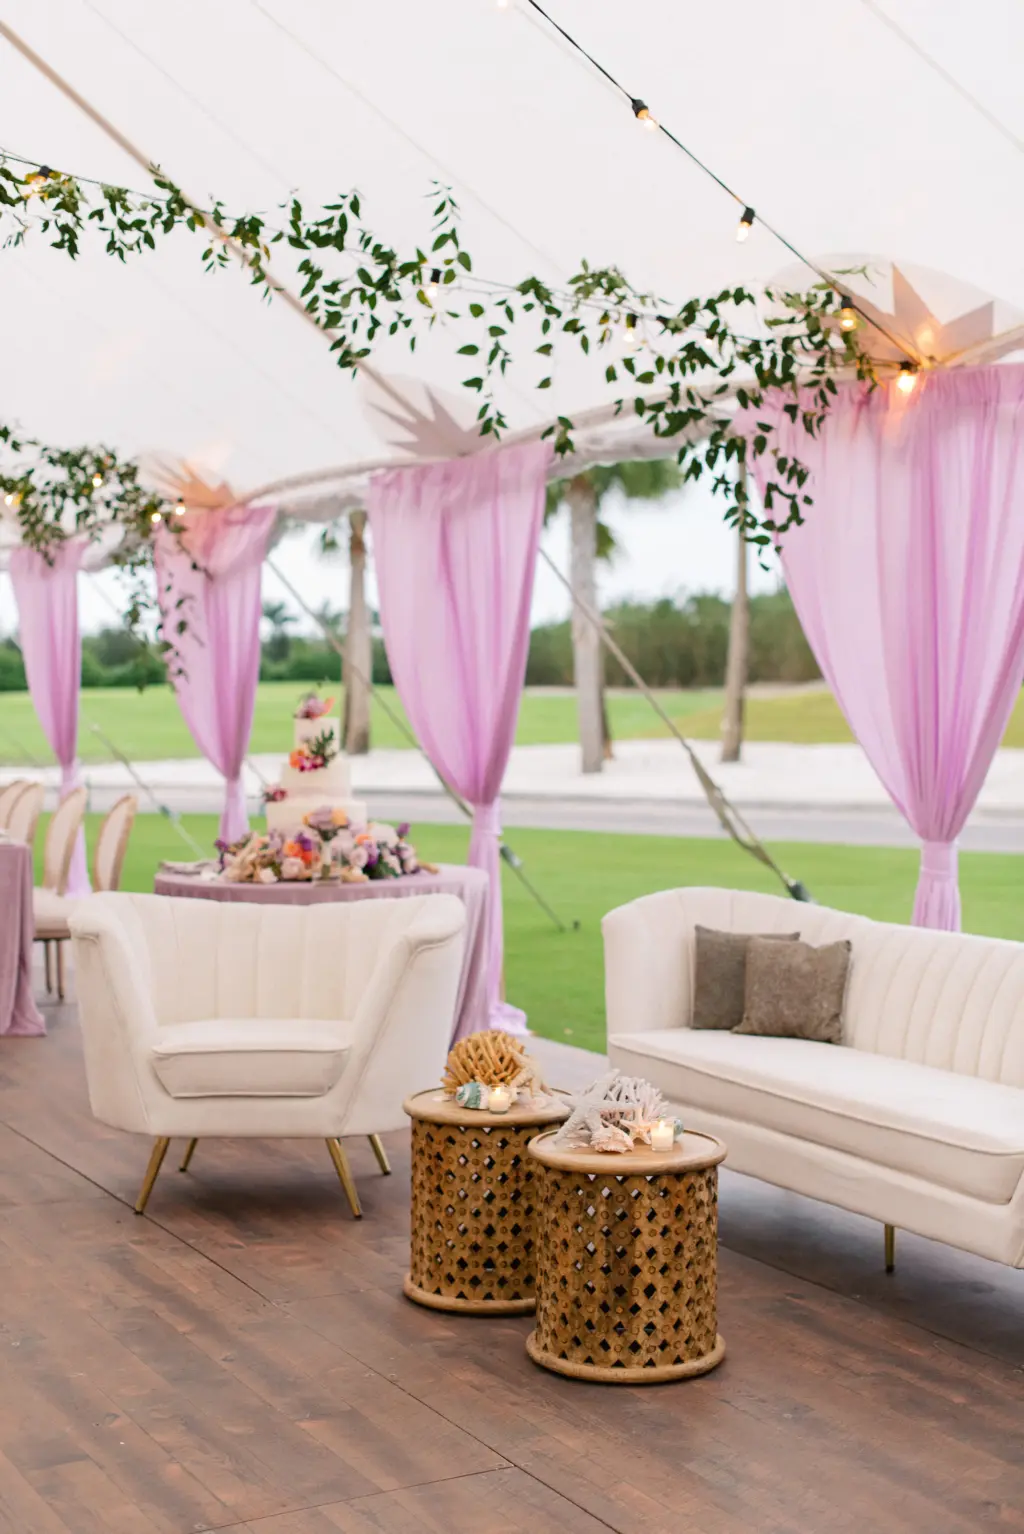 Cream Lounge Furniture for Wedding Reception | Hanging Ruscus Greenery and Purple Drapery